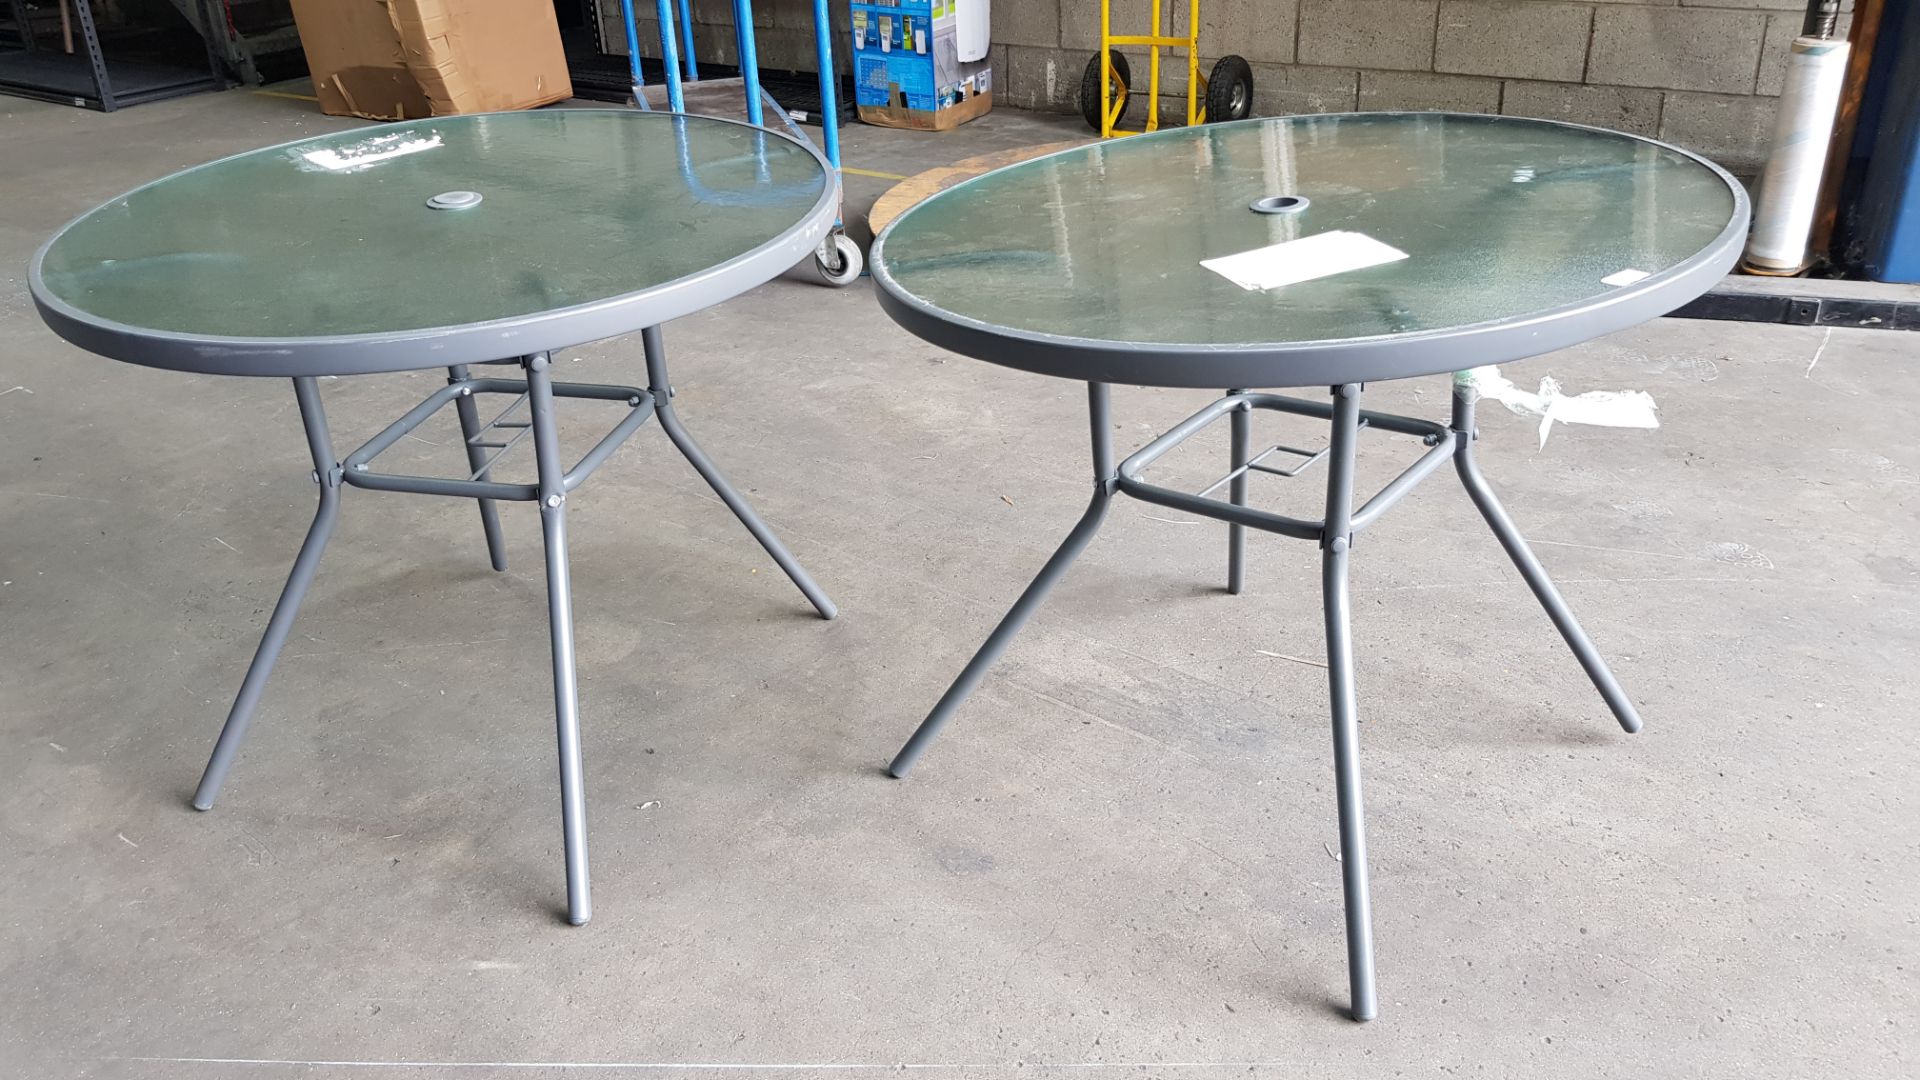 (R2K) 2x Andorra Round Table With 2x Parasol. RRP £74.99. Both Tables Have Been Used And Constructe - Image 4 of 5